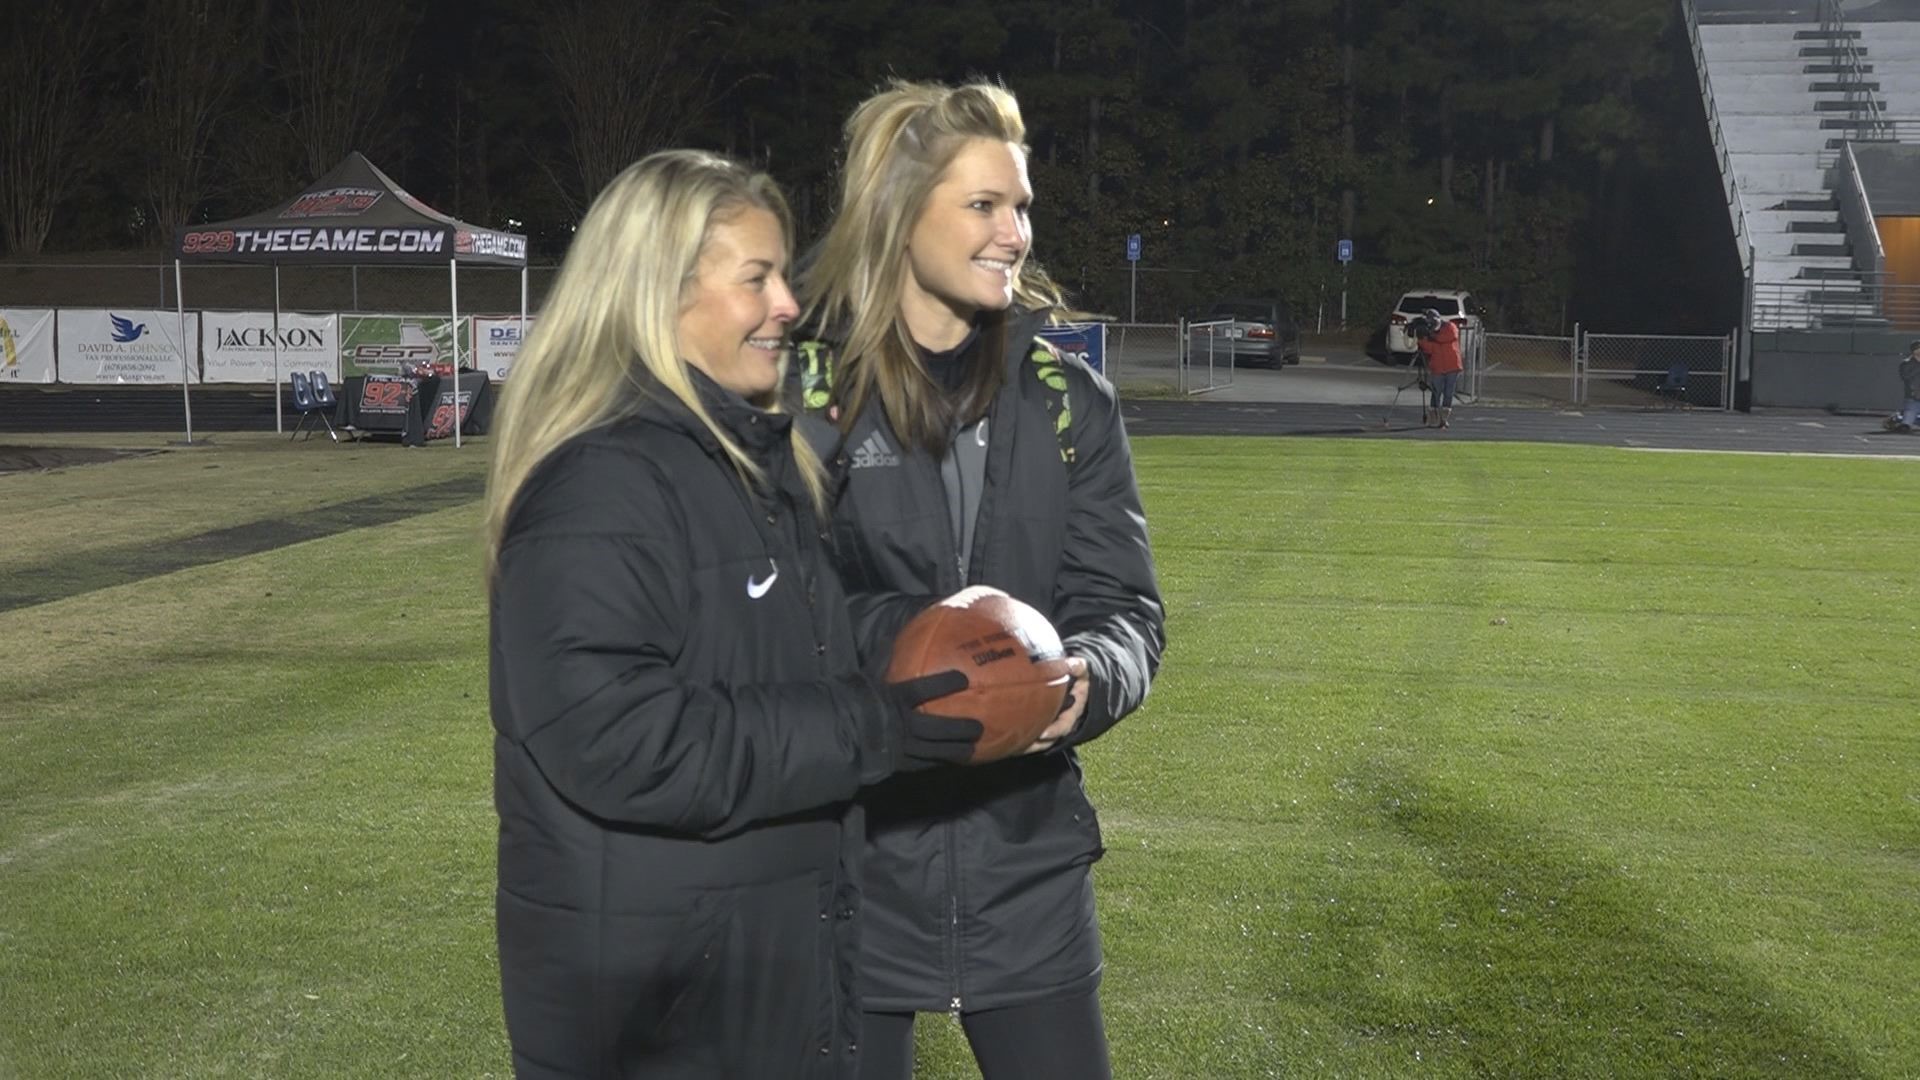 The Nov. 28 event was all about supporting girls in sports and physical exercise.